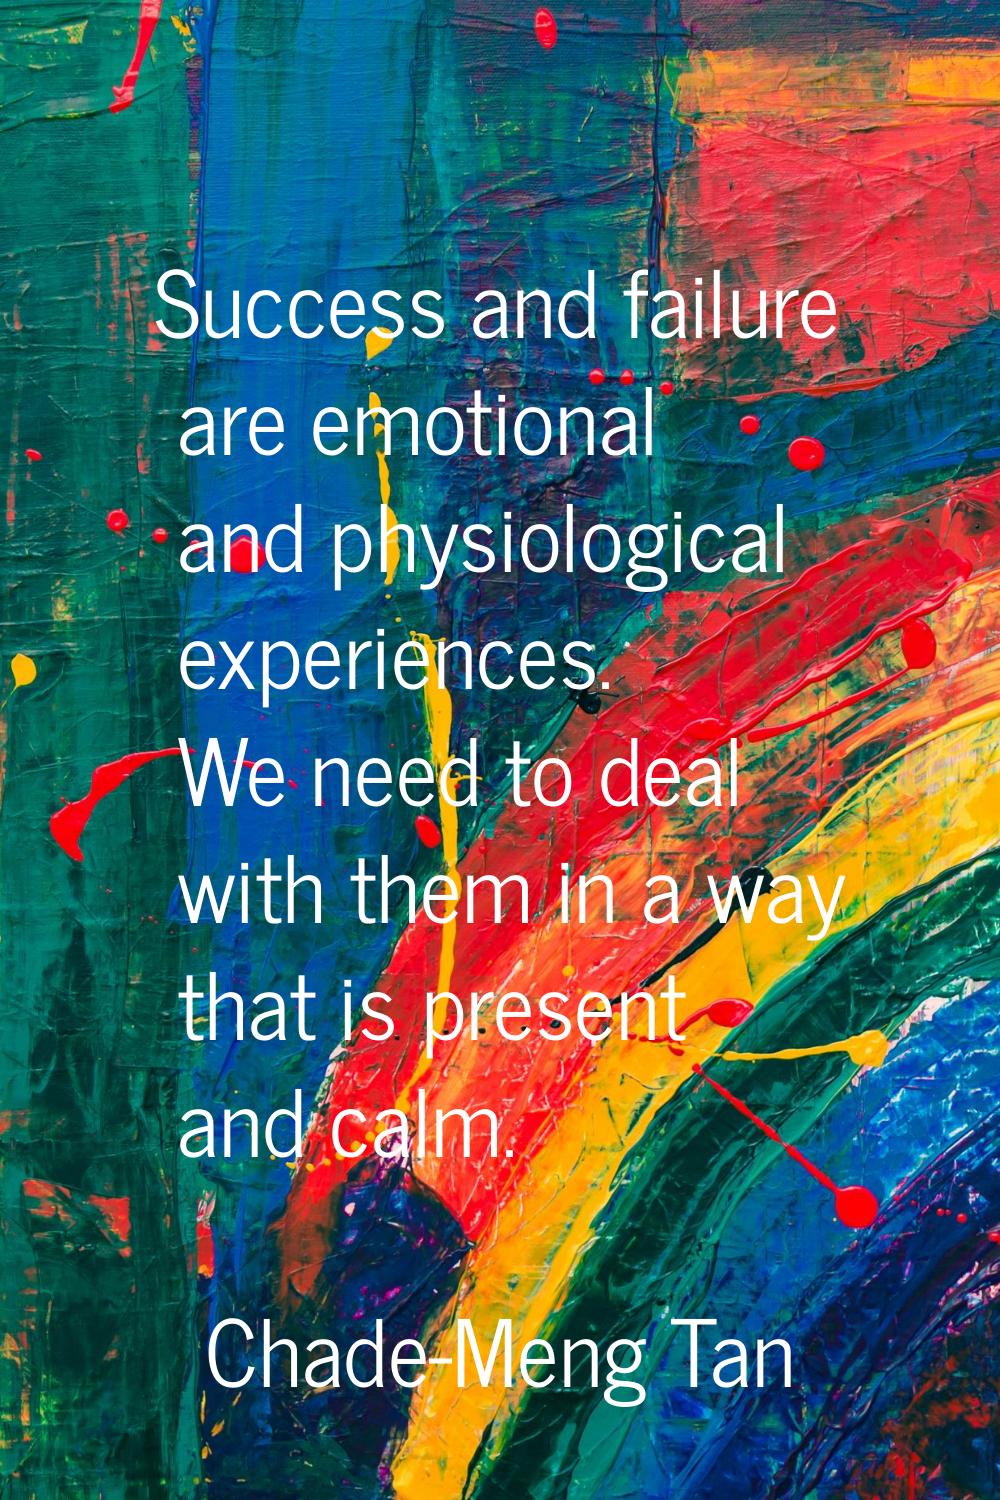 Success and failure are emotional and physiological experiences. We need to deal with them in a way